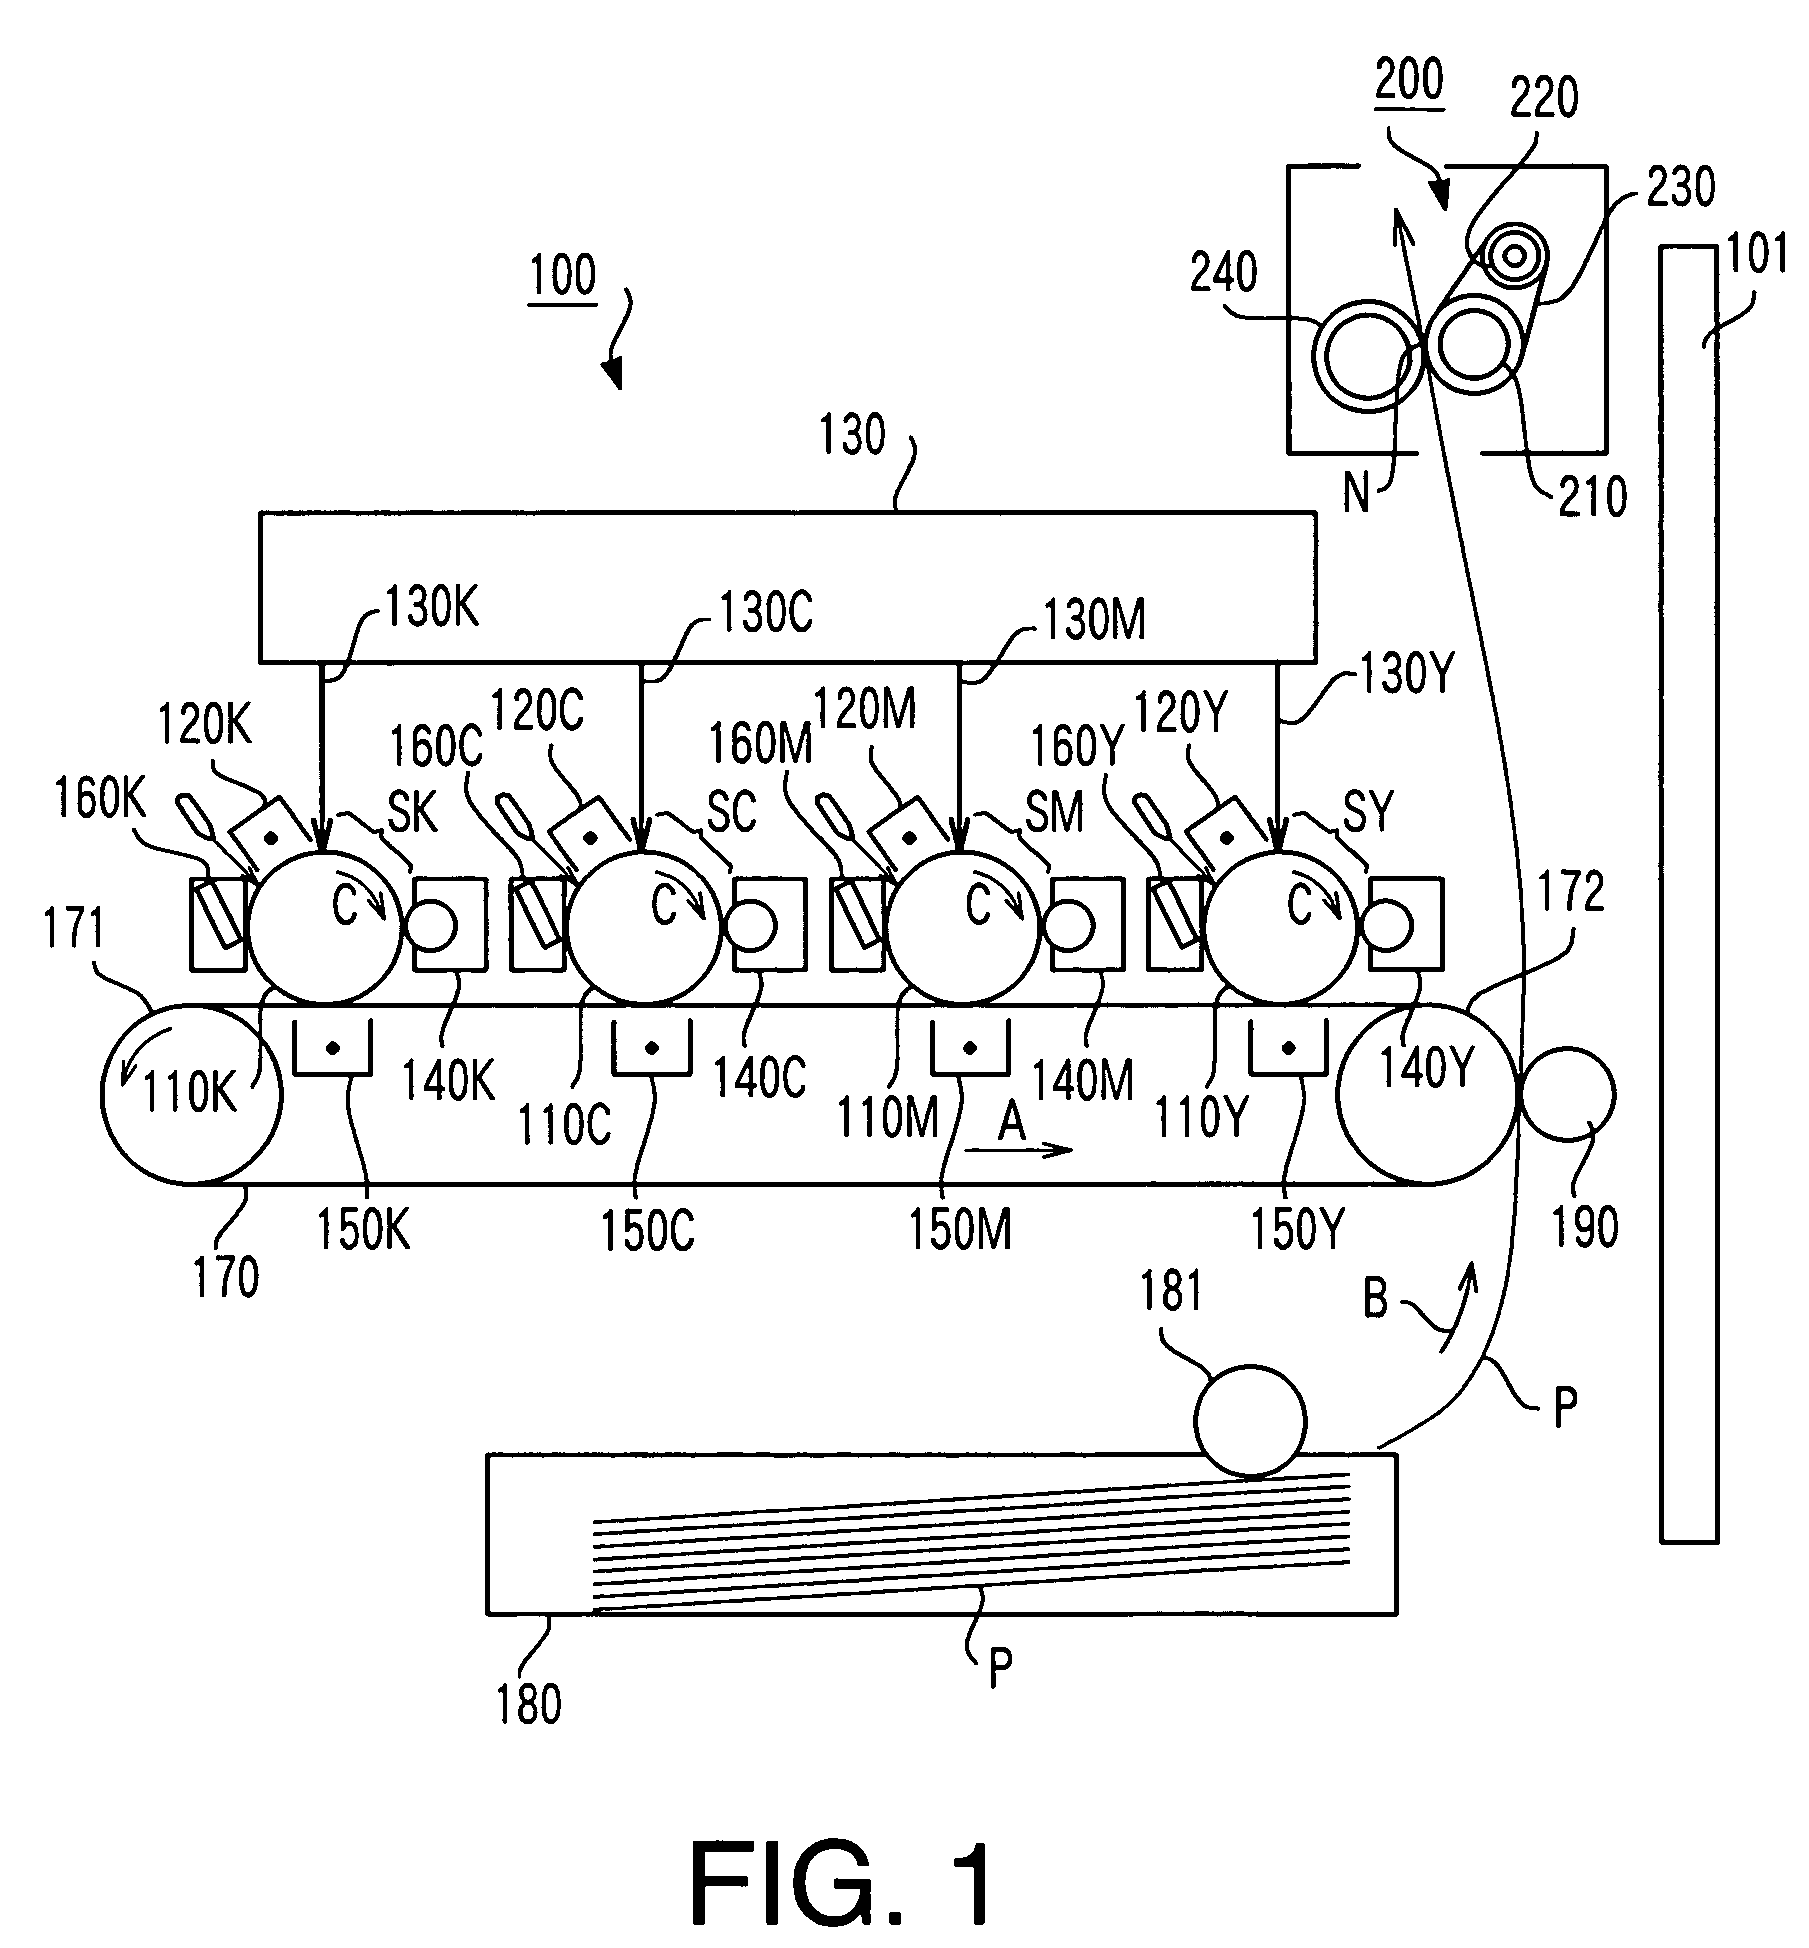 Image heating apparatus including PID control